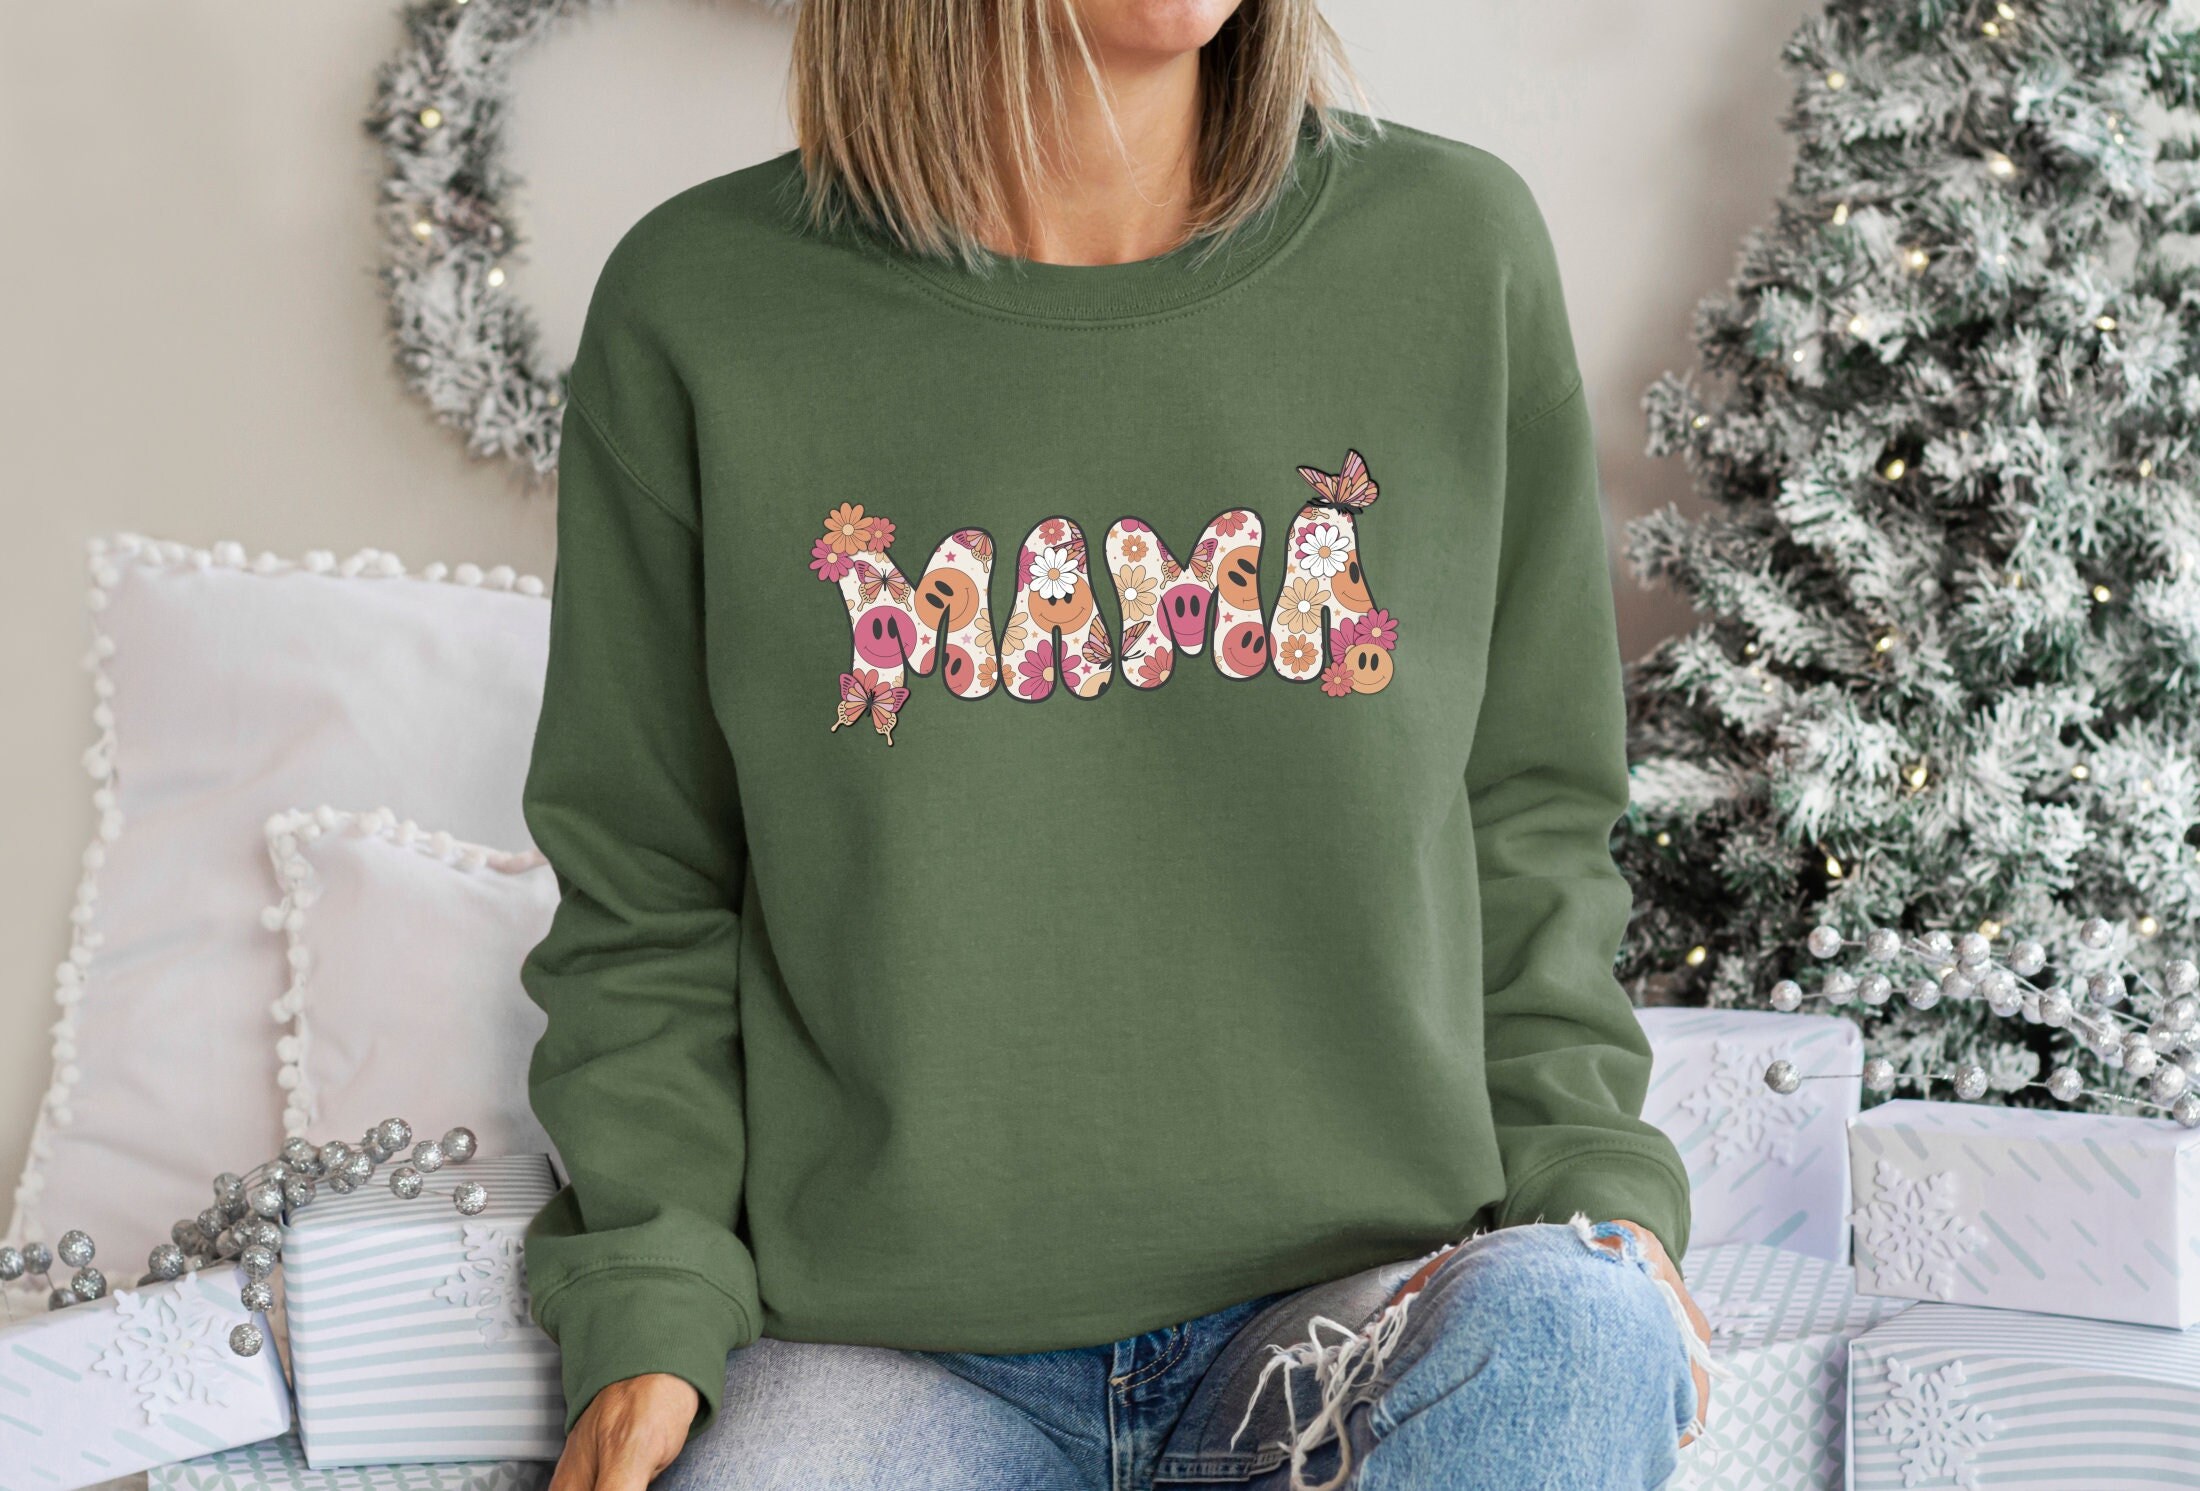 Mama Sweatshirt, Mama’s Girl Hoodie, Mother’s Day Gifts, Mother’s Day Hoodie, Wildflowers Mama Hoodie, New Mom Gift, Mother’s Day Outfit